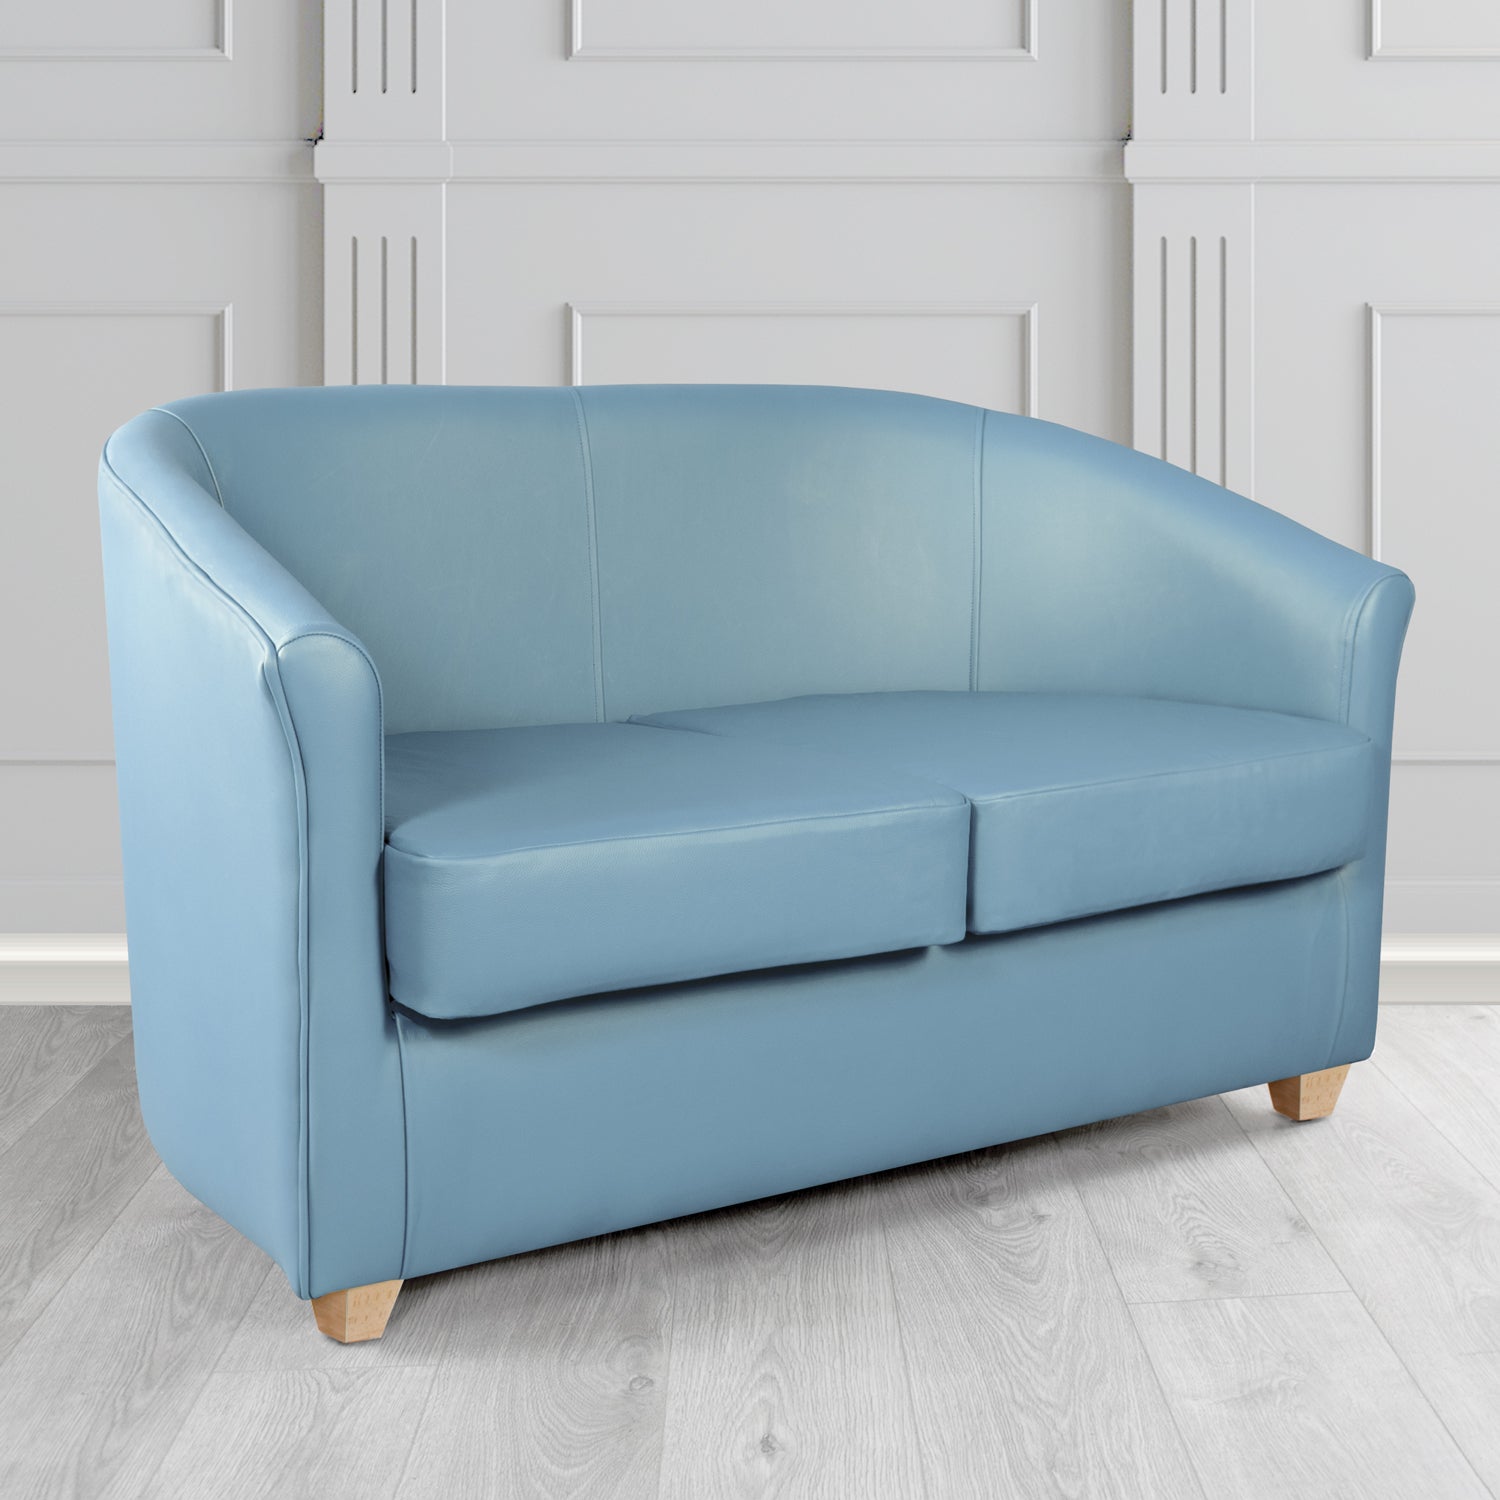 Cannes 2 Seater Tub Sofa in Just Colour Cool Blue Crib 5 Faux Leather - The Tub Chair Shop